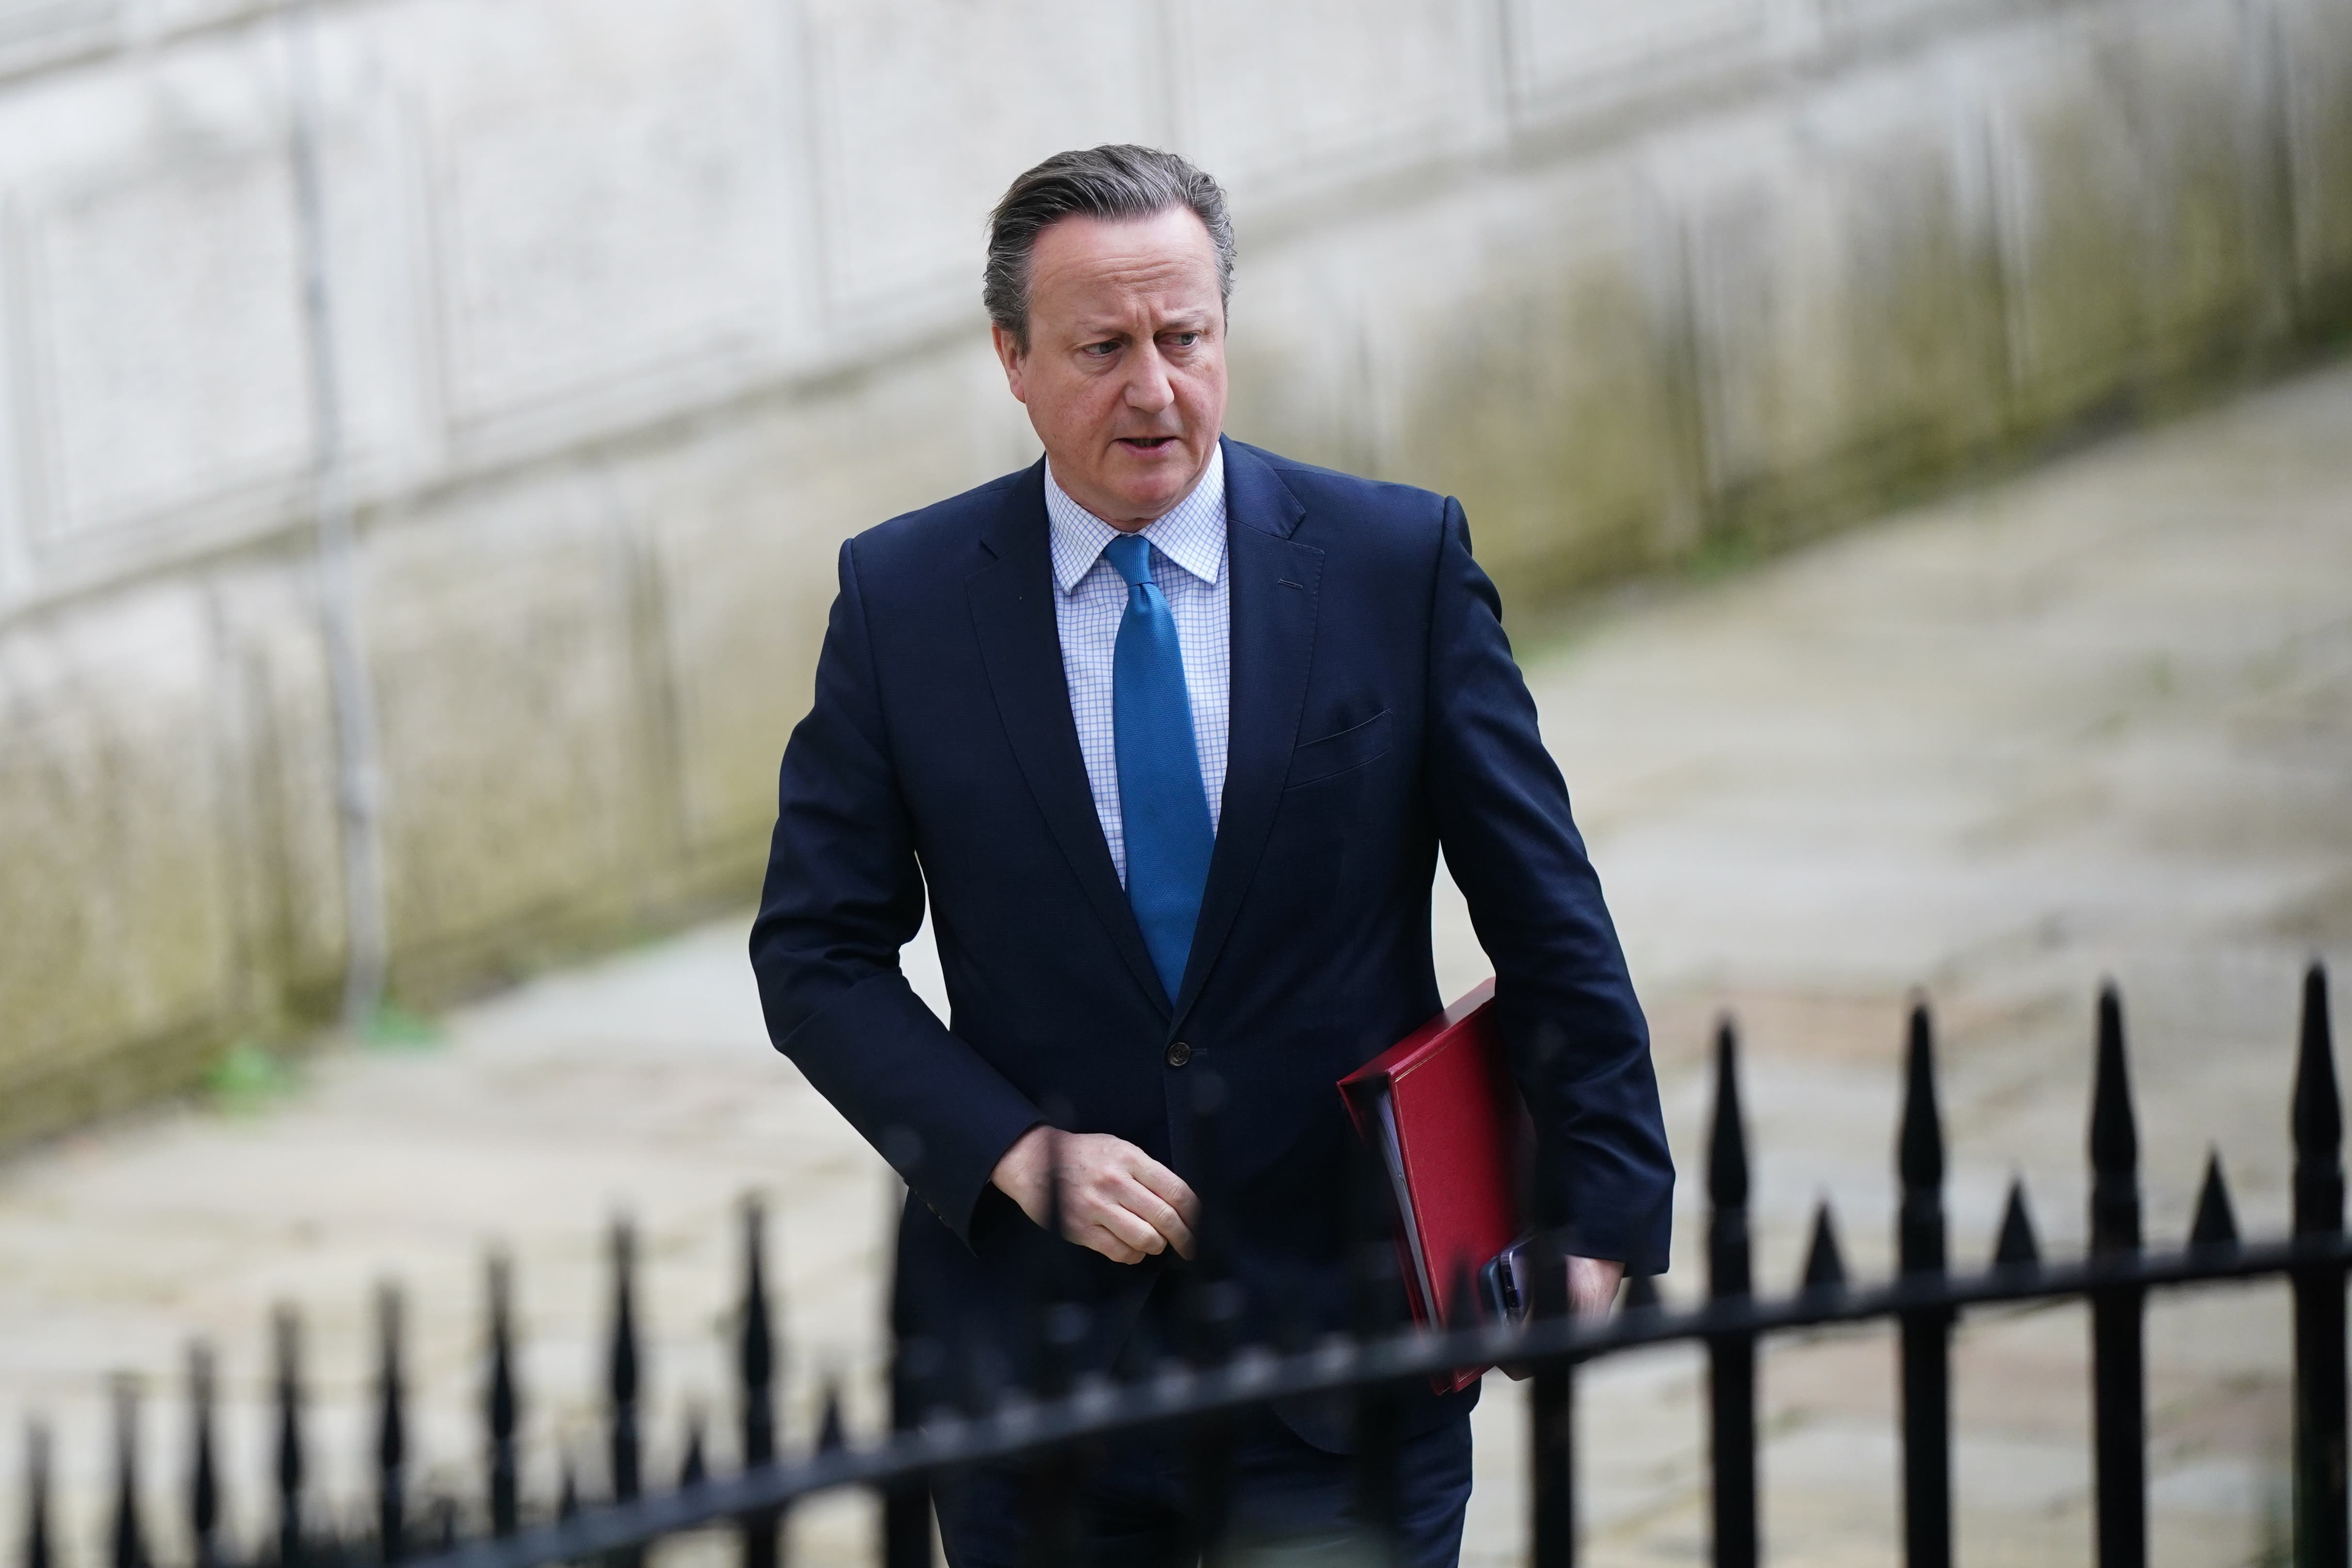 Lord Cameron said the UK would not be suspending arms exports to Israel